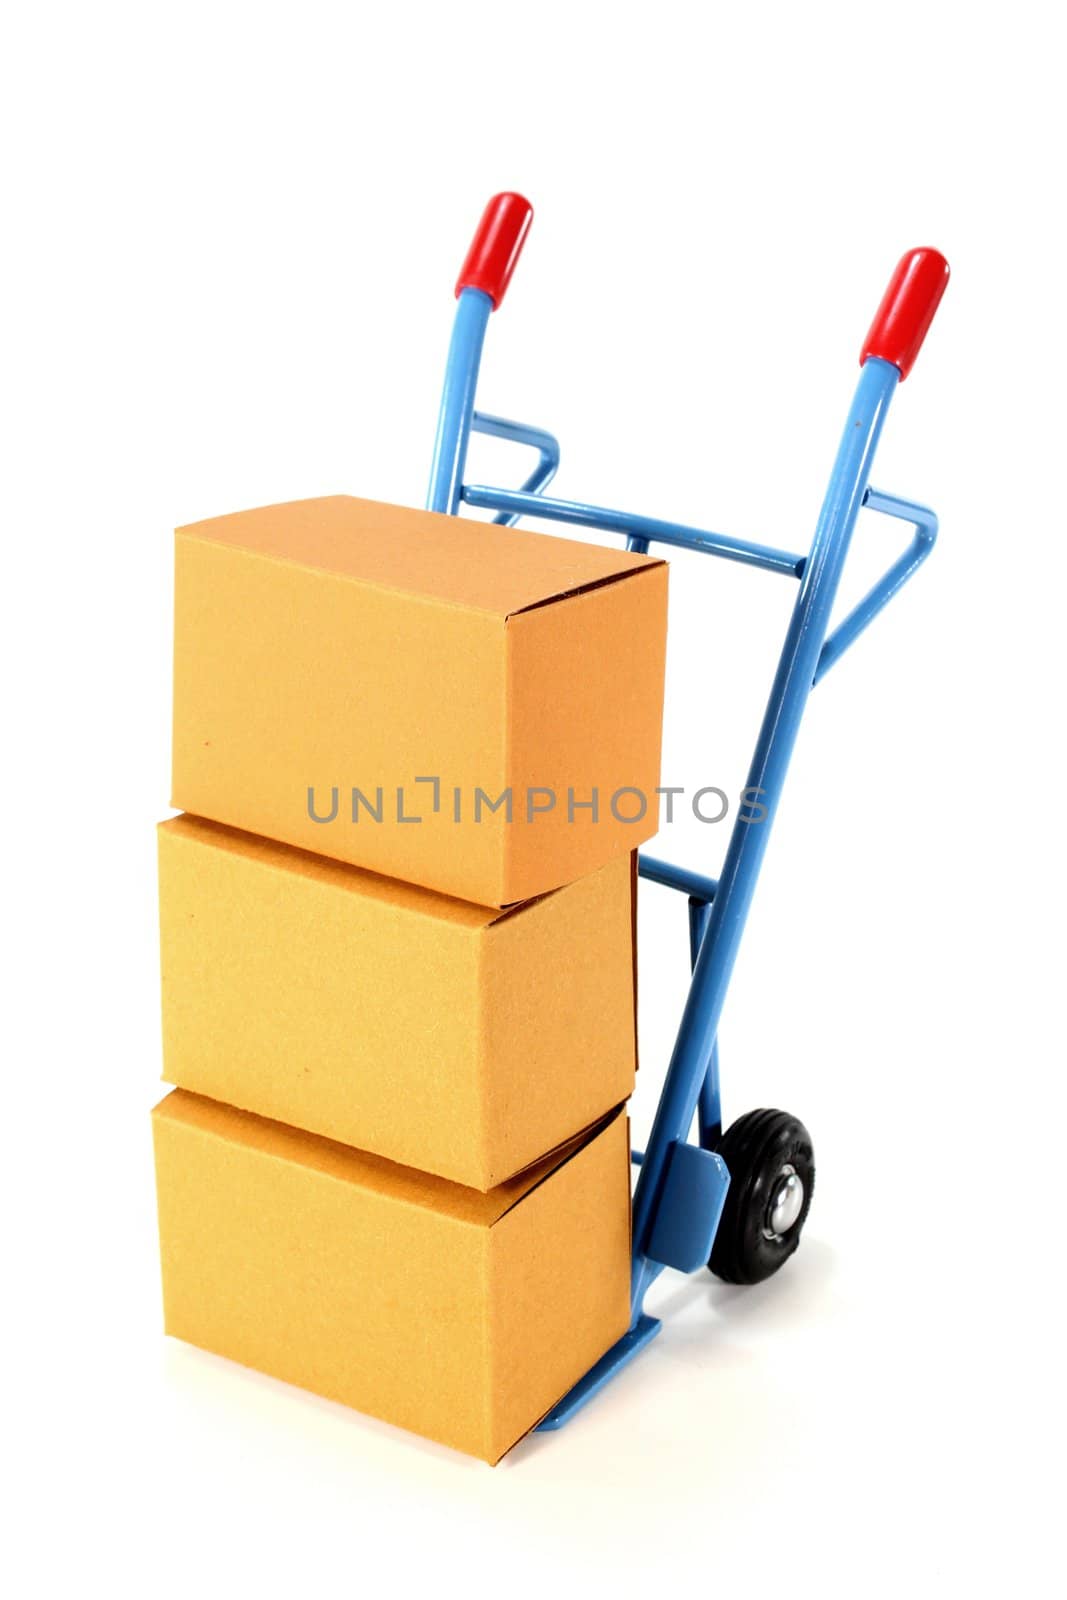 a sack truck and packing boxes on a white background